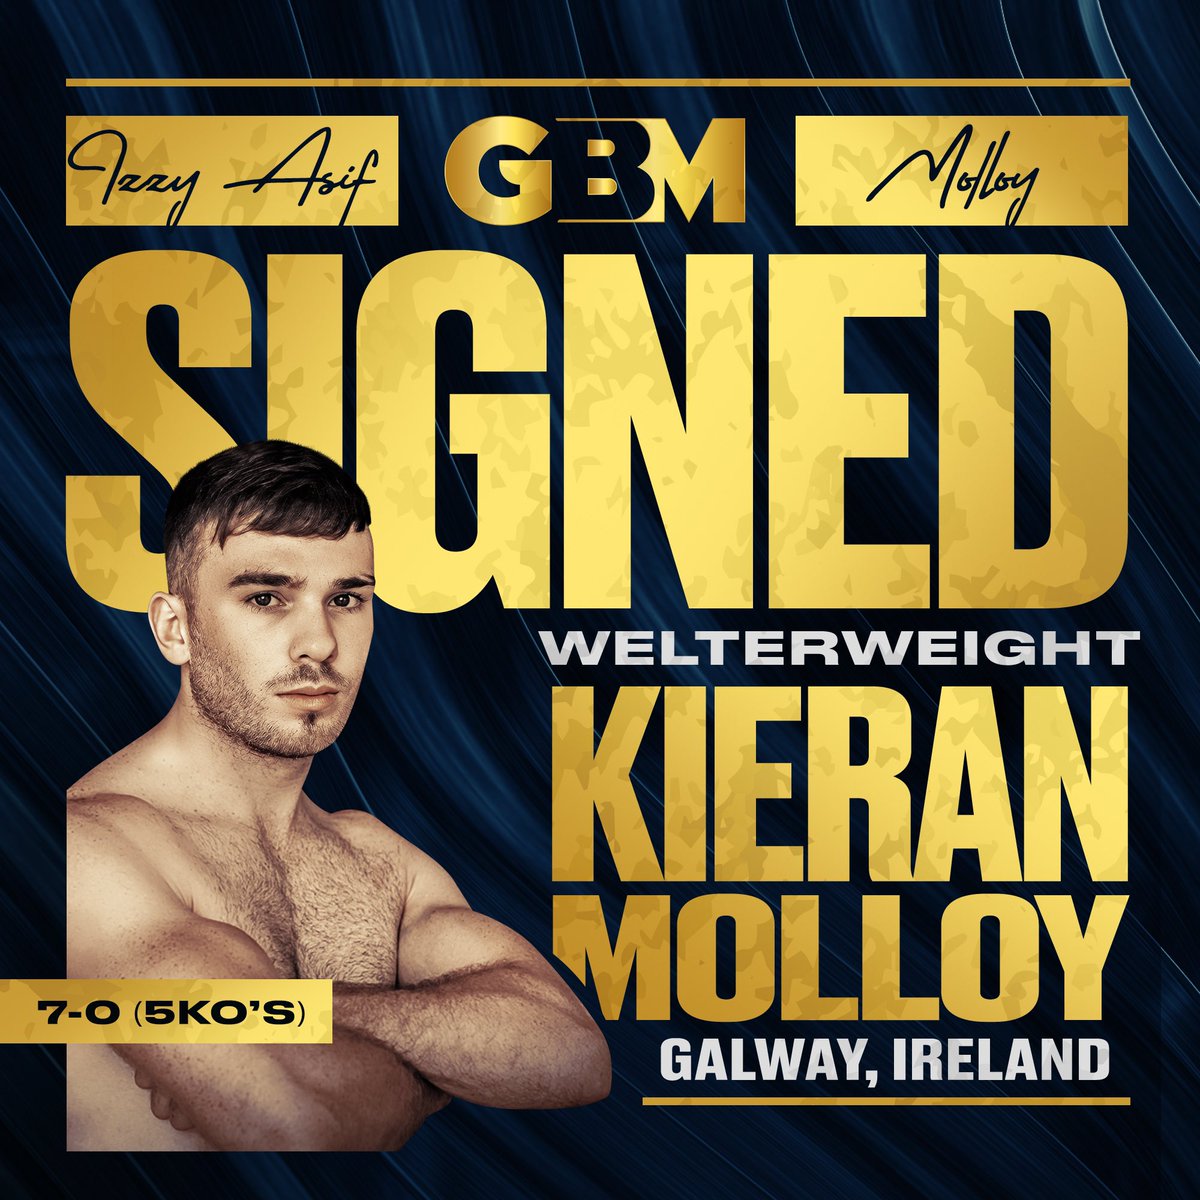 𝐖𝐄𝐋𝐂𝐎𝐌𝐄 𝐓𝐎 𝐓𝐇𝐄 𝐓𝐄𝐀𝐌✍️ Galway’s Kieran Molloy is ready to take his career to the next level‼️ #boxing | #boxingnews | #boxingworld | #GBMSports